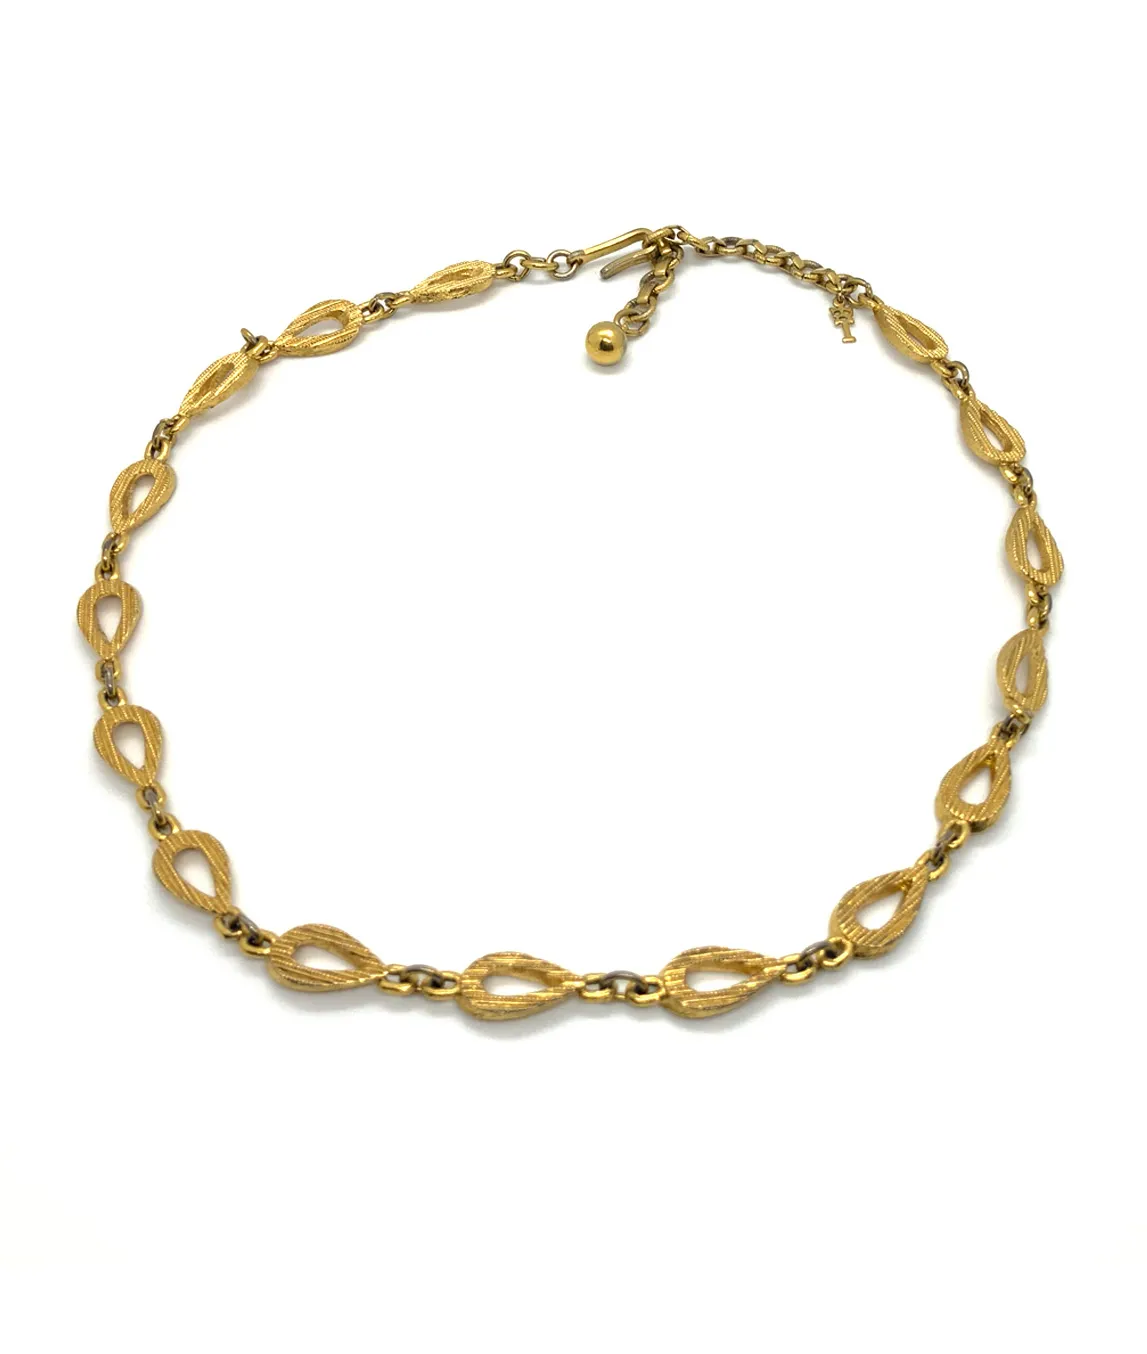 Crown Trifari gold link necklace